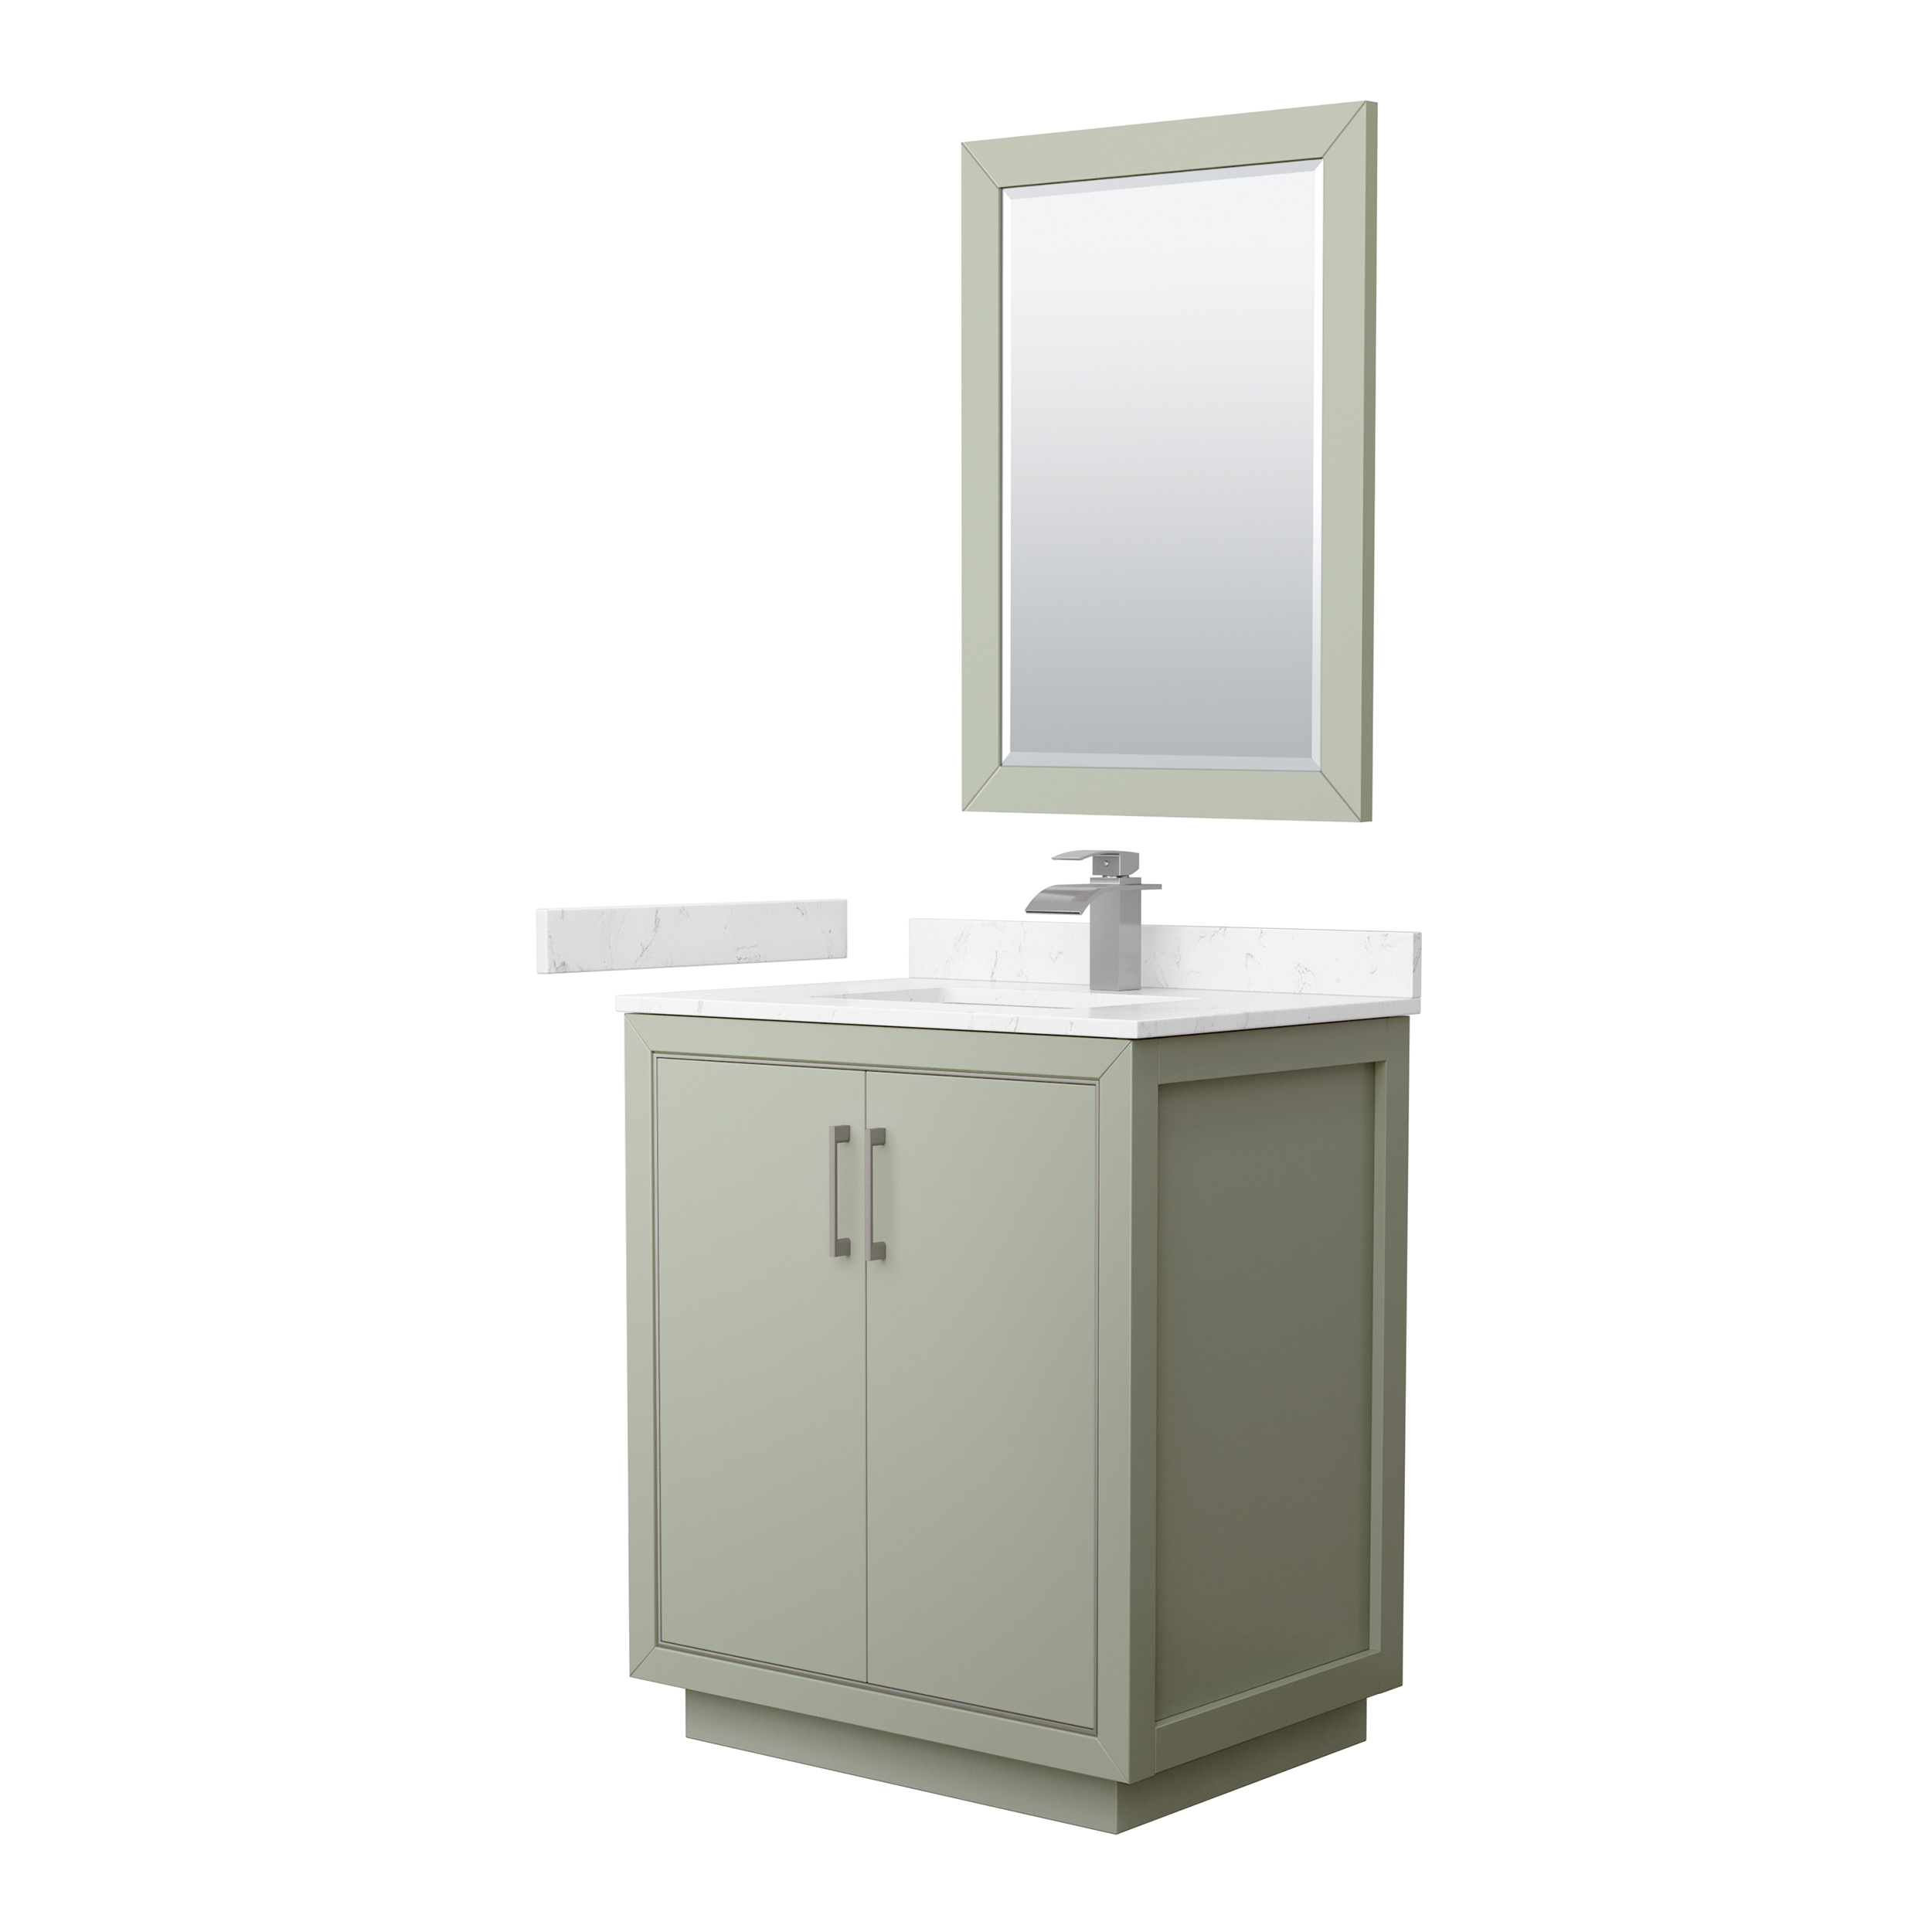 icon 30" single vanity with optional cultured marble counter - light green